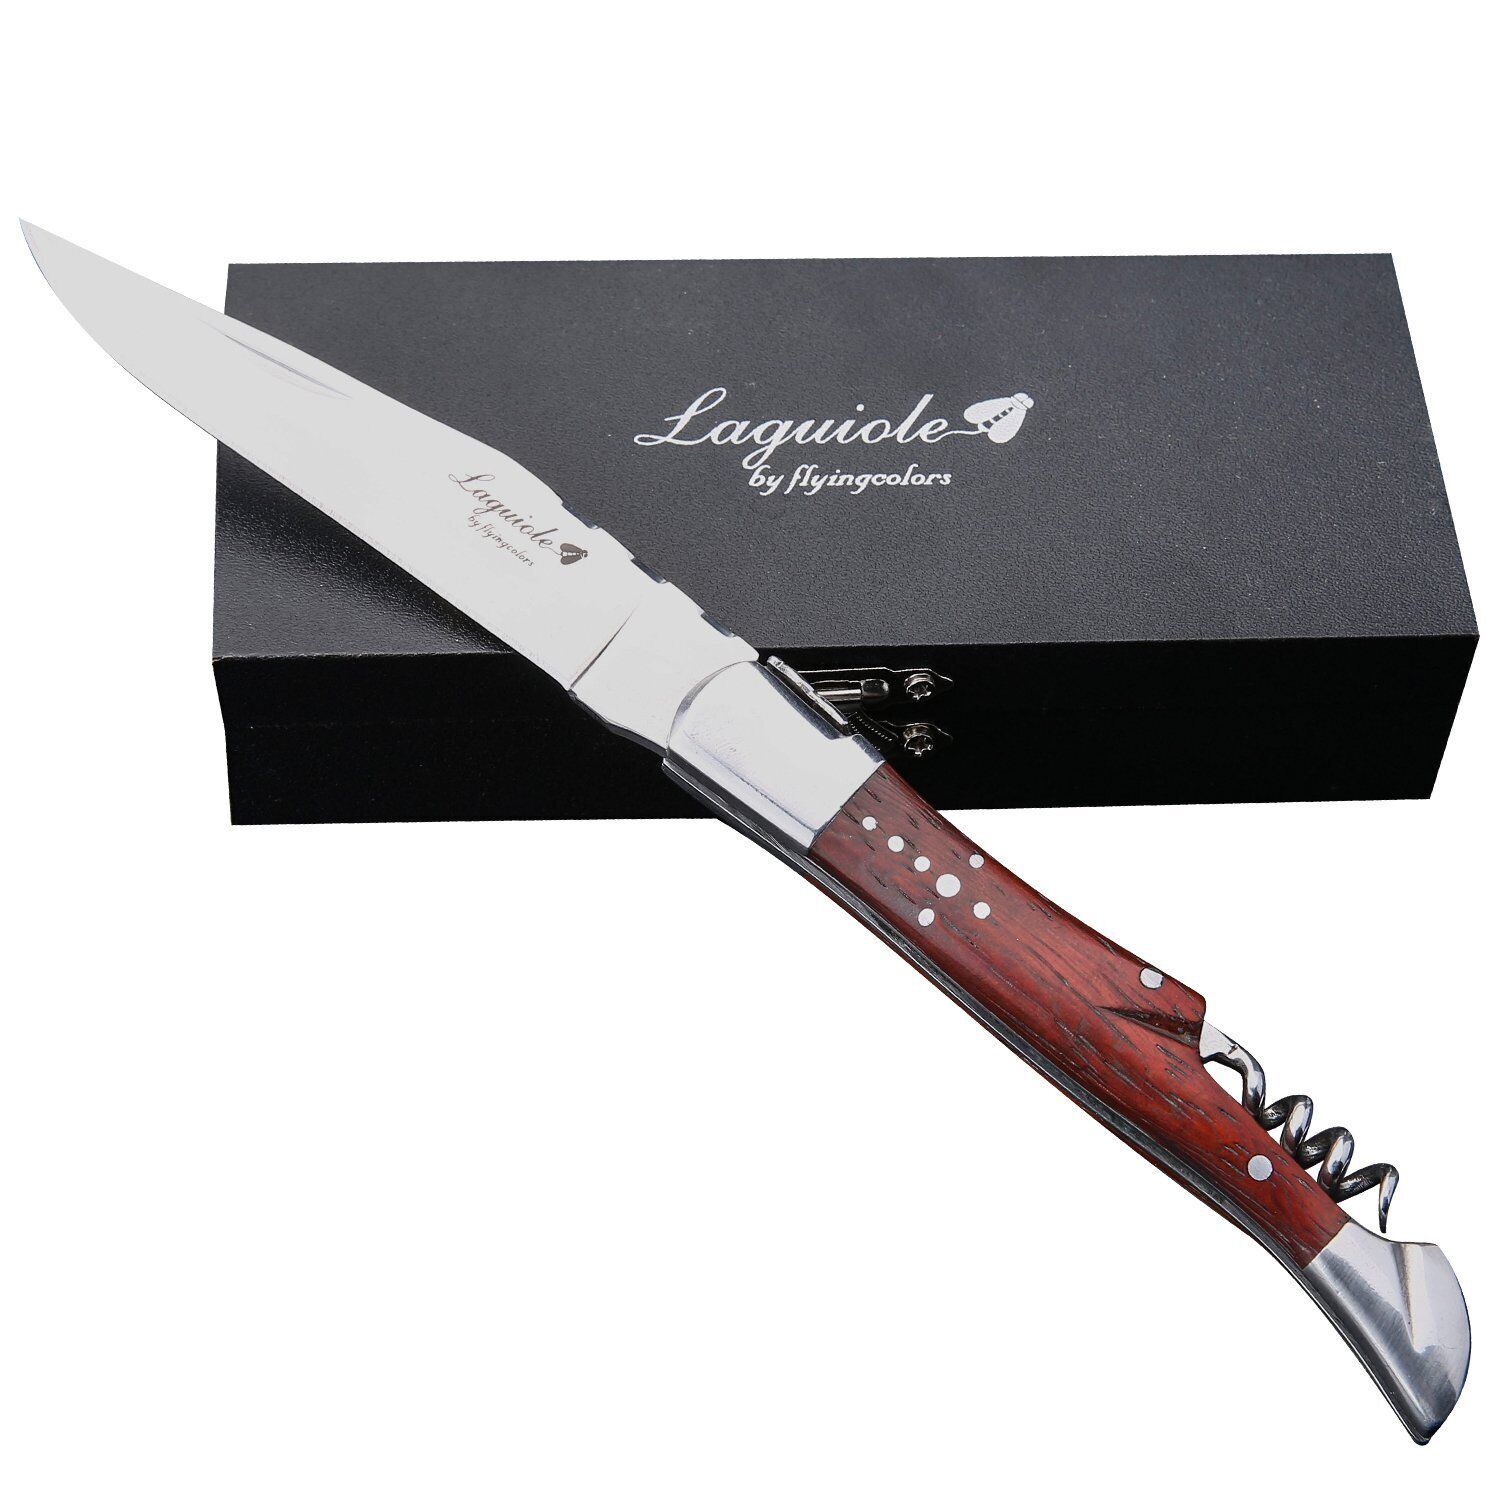 LAGUIOLE BY Folding Pocket Knife. Stainless Steel, Built in Corkscrew. (Wood)